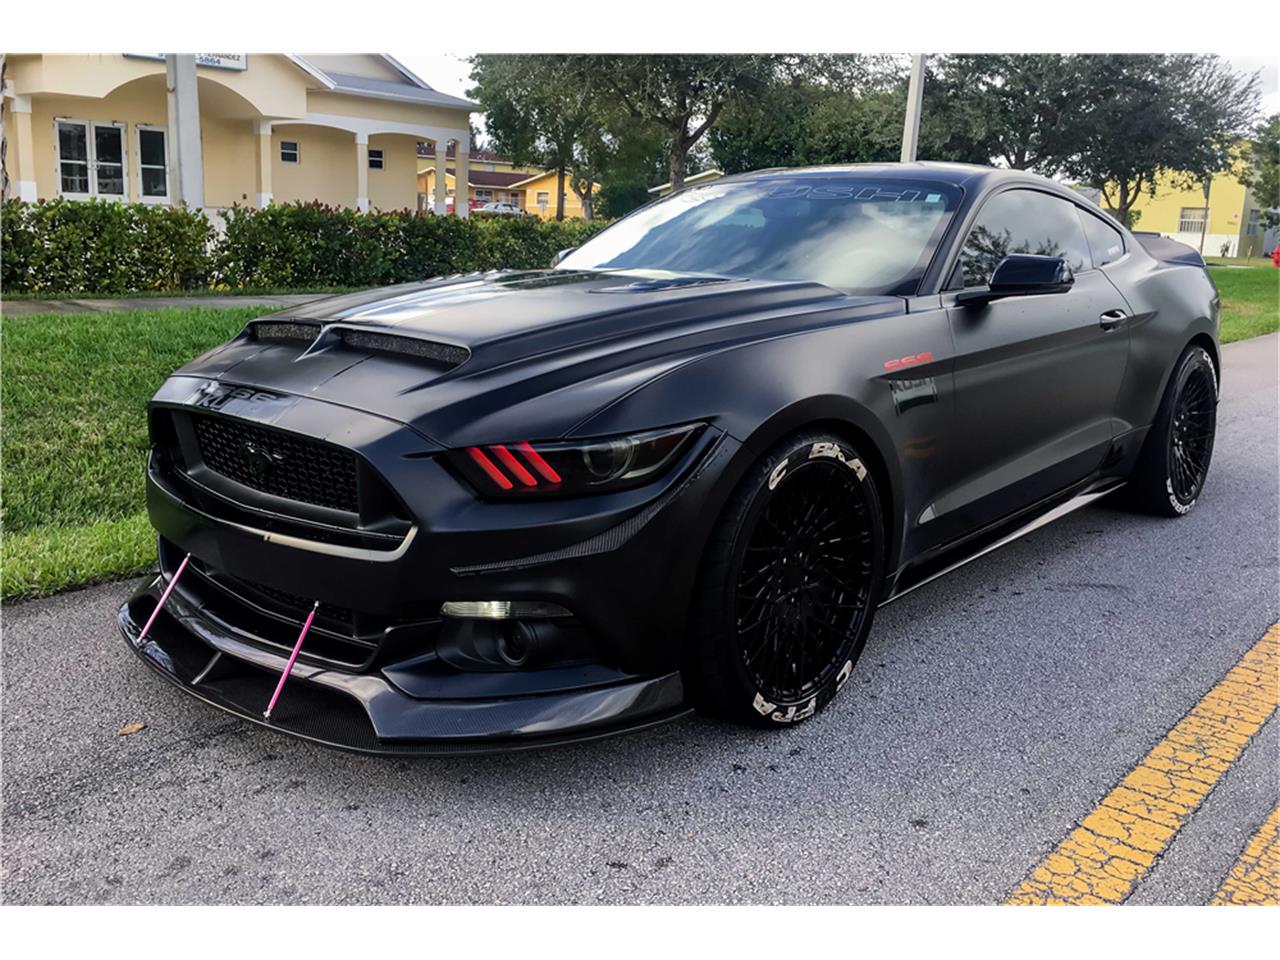 2015 Ford Mustang GT for Sale | ClassicCars.com | CC-956510